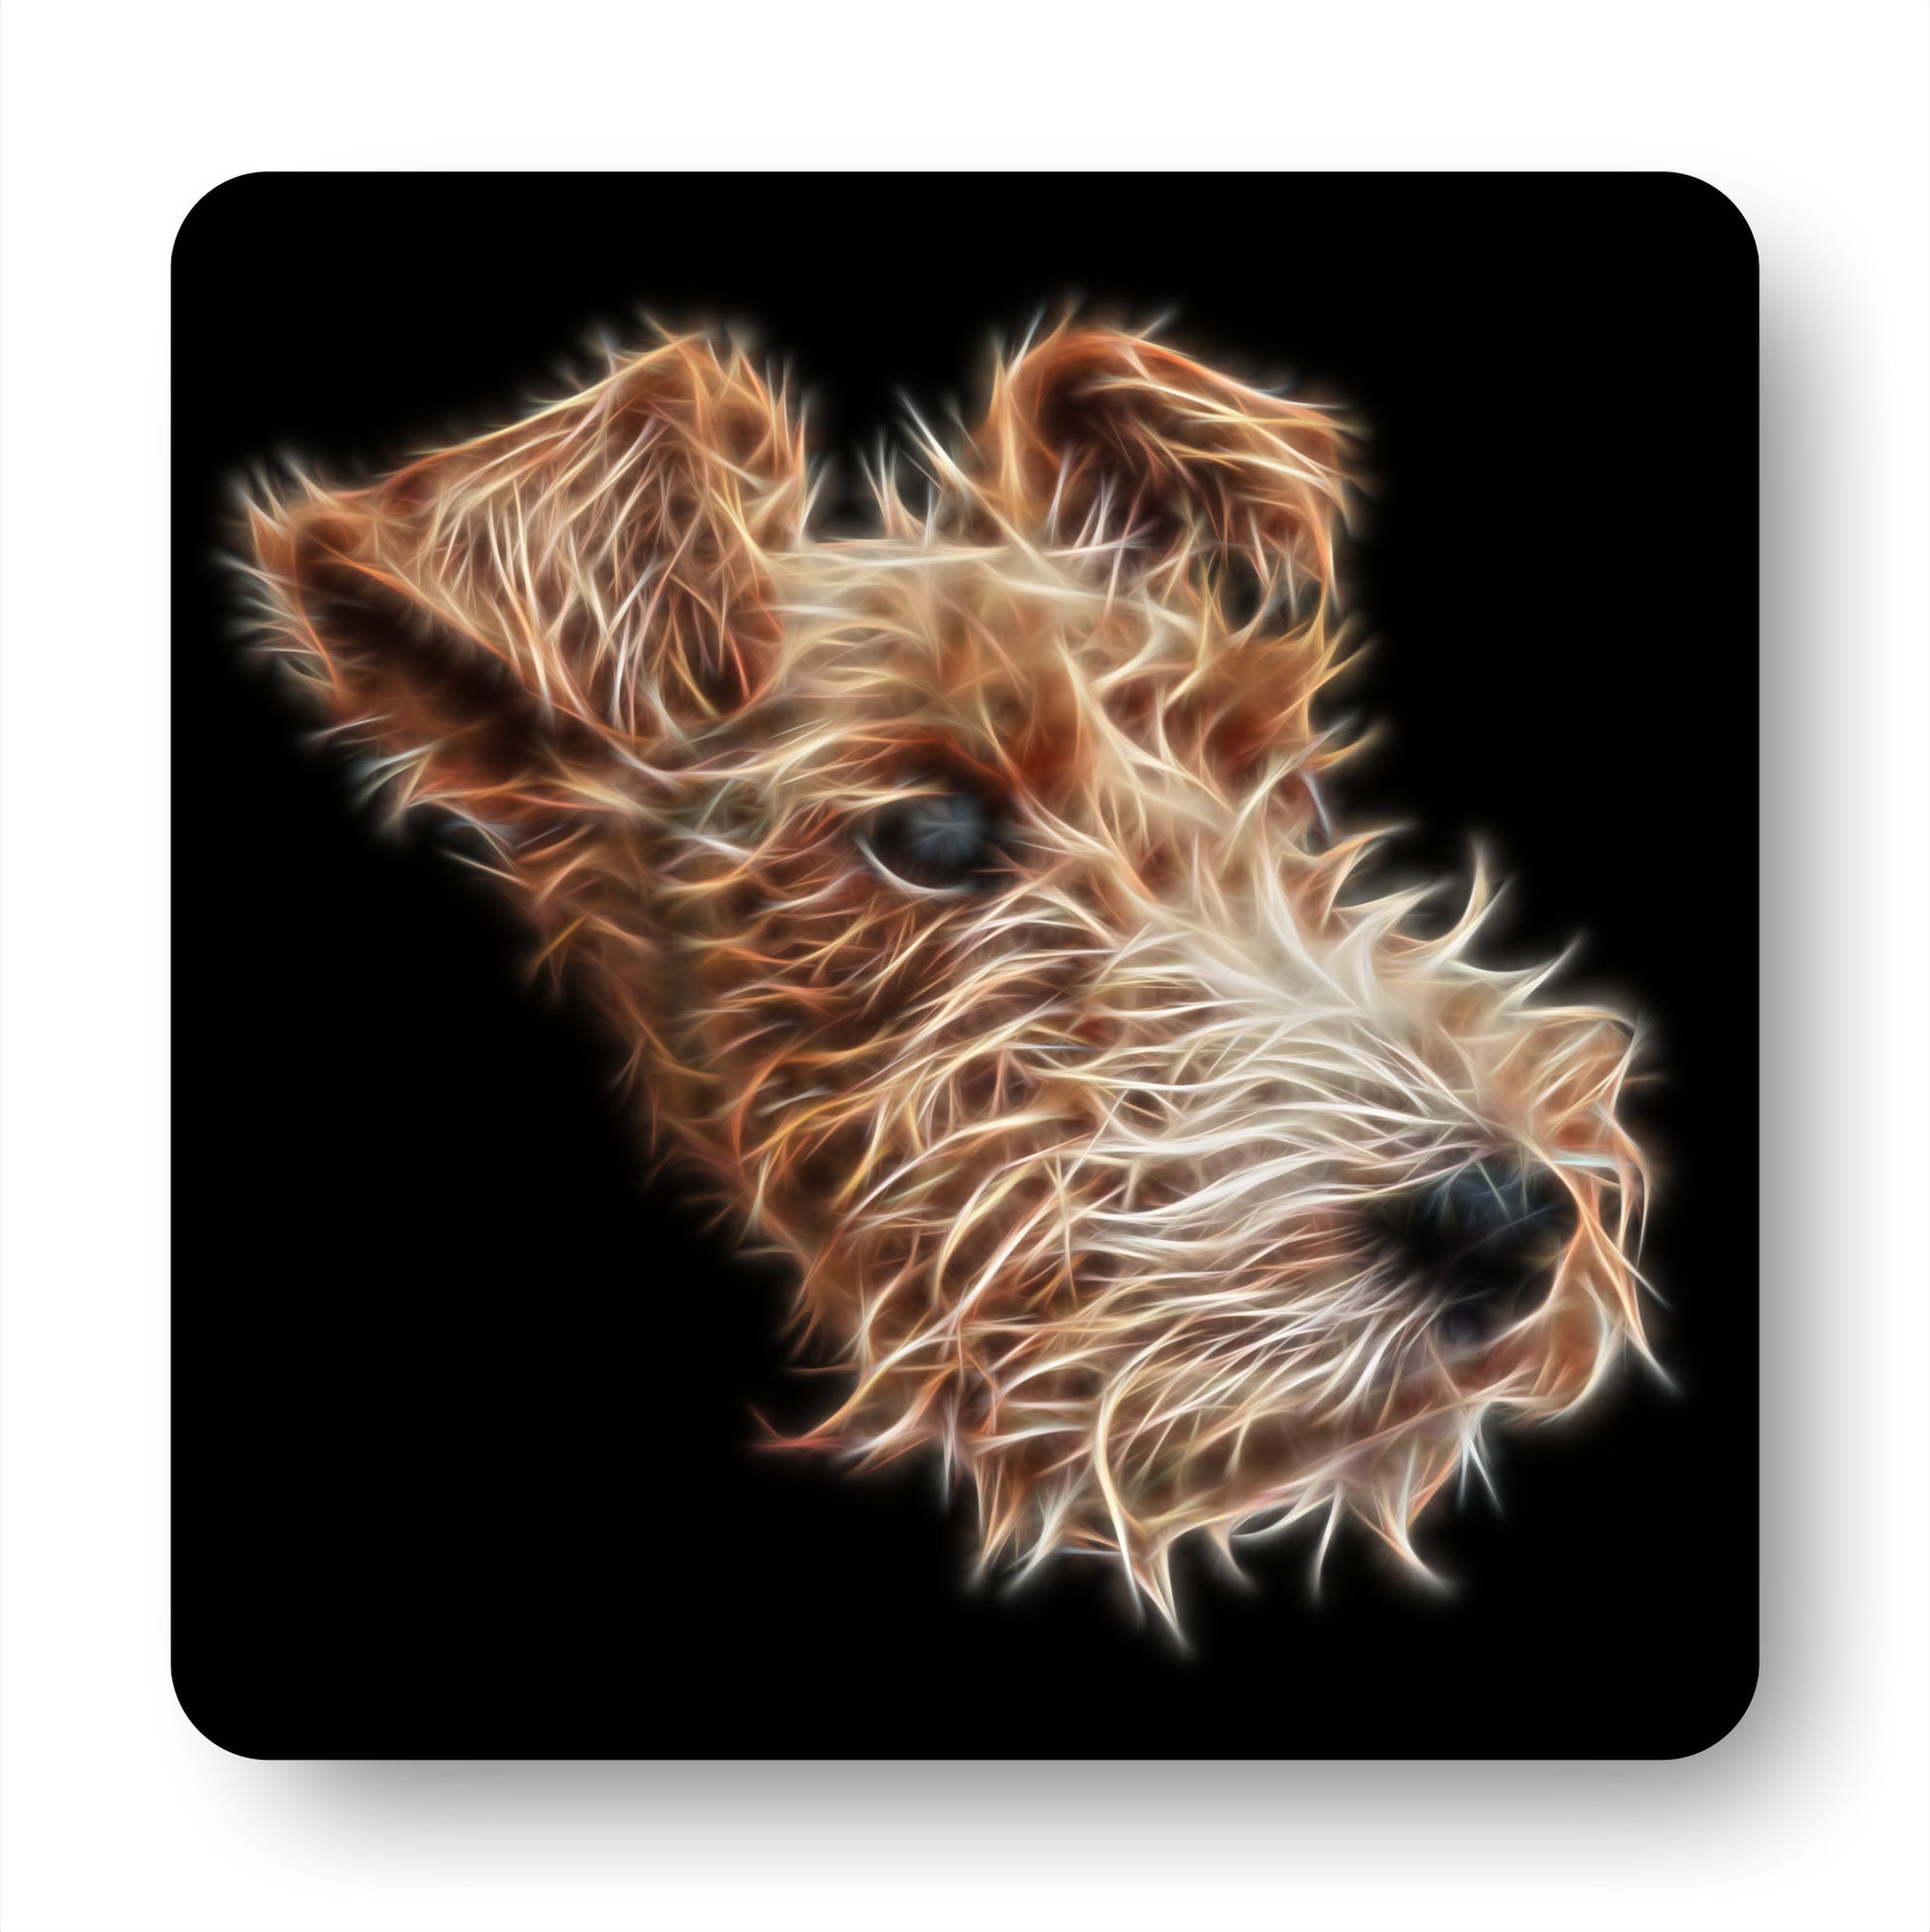 Wire Hair Fox Terrier Coasters, Set of 2, with Stunning Fractal Art Design.